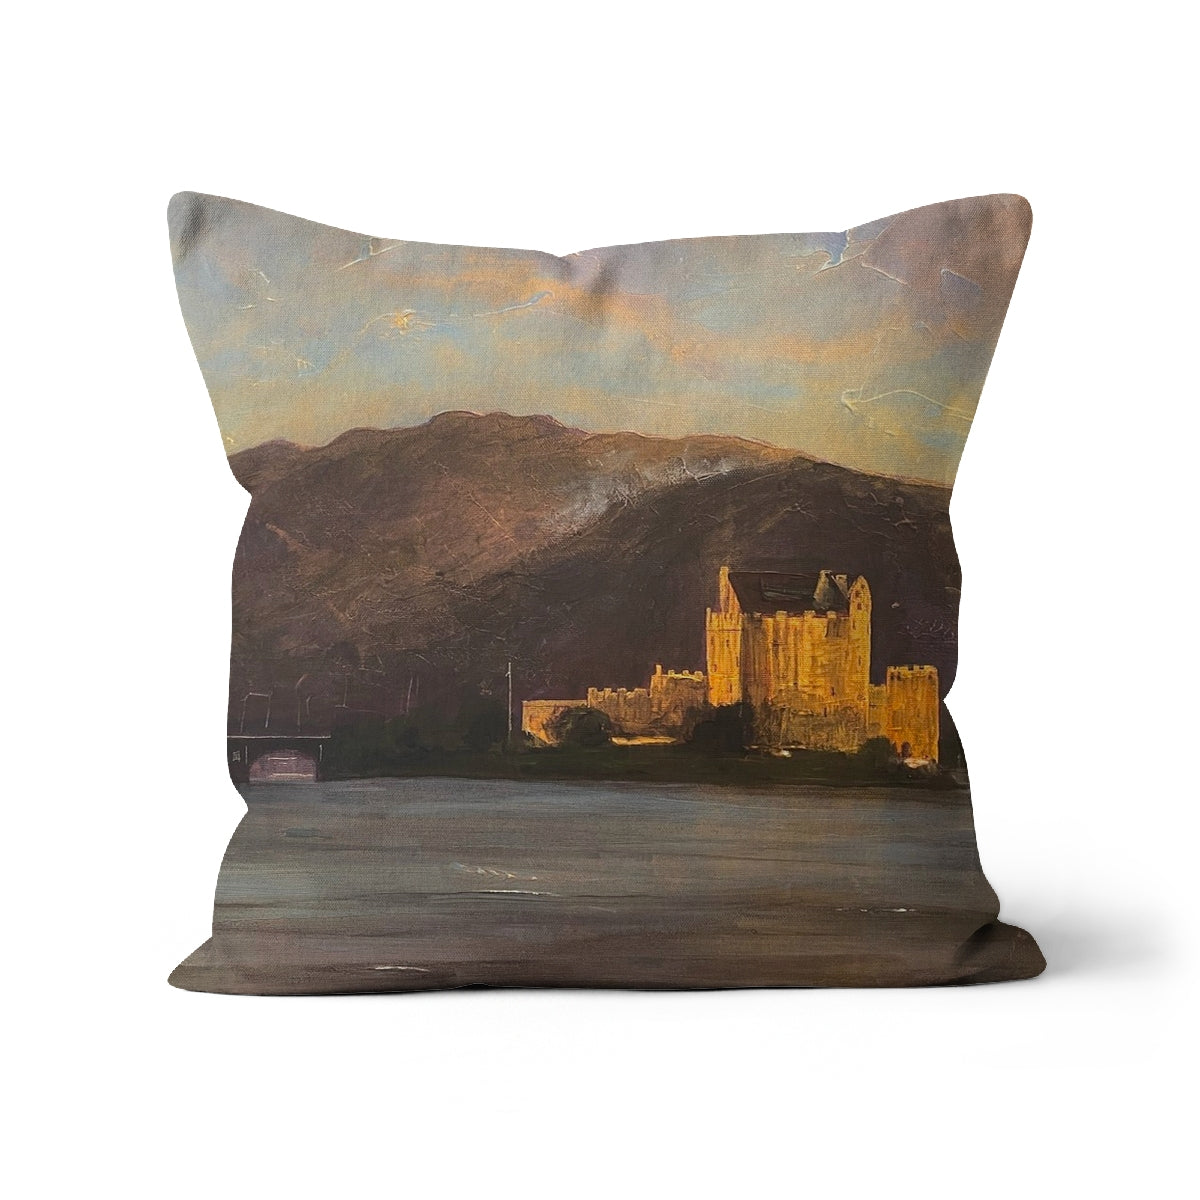 Eilean Donan Castle Art Gifts Cushion-Cushions-Historic & Iconic Scotland Art Gallery-Faux Suede-12"x12"-Paintings, Prints, Homeware, Art Gifts From Scotland By Scottish Artist Kevin Hunter